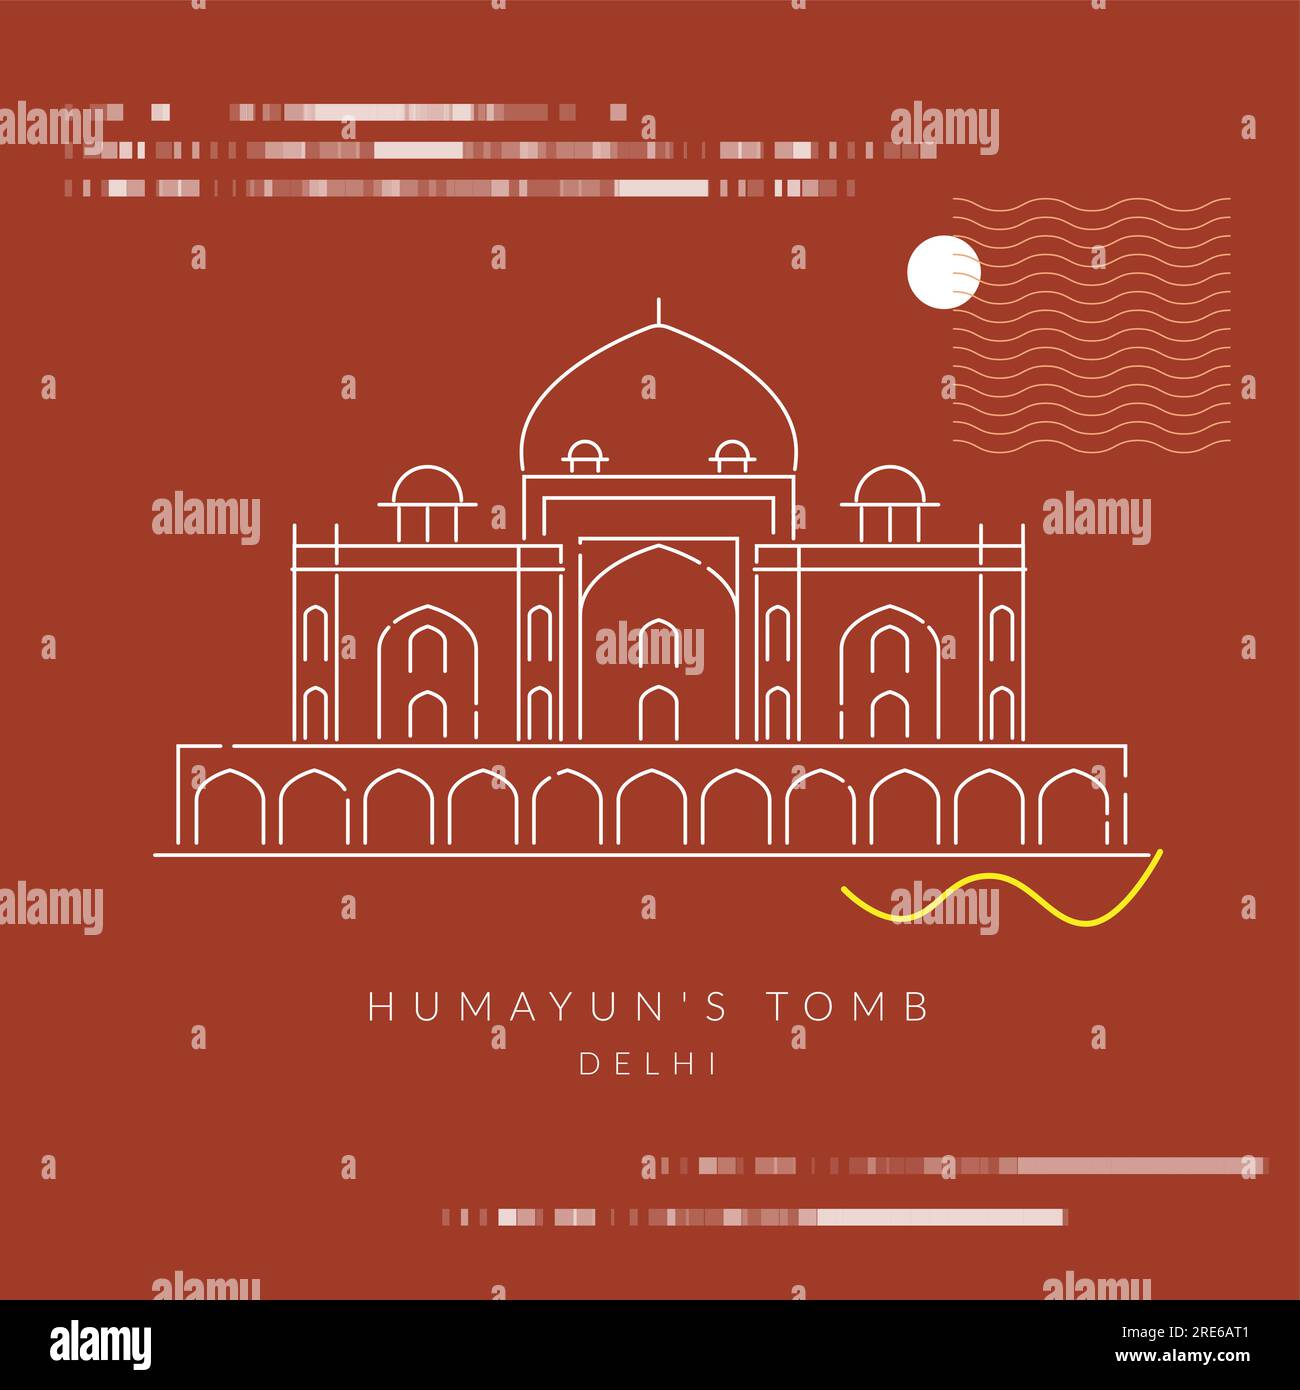 Architectural Significance #nizamuddinrenewalproject Humayun's garden-tomb  is built on a monumental scale, with no precedence in the Islamic world.  The garden-tomb truly represents Mughal innovation with its monumental  scale, and its garden setting